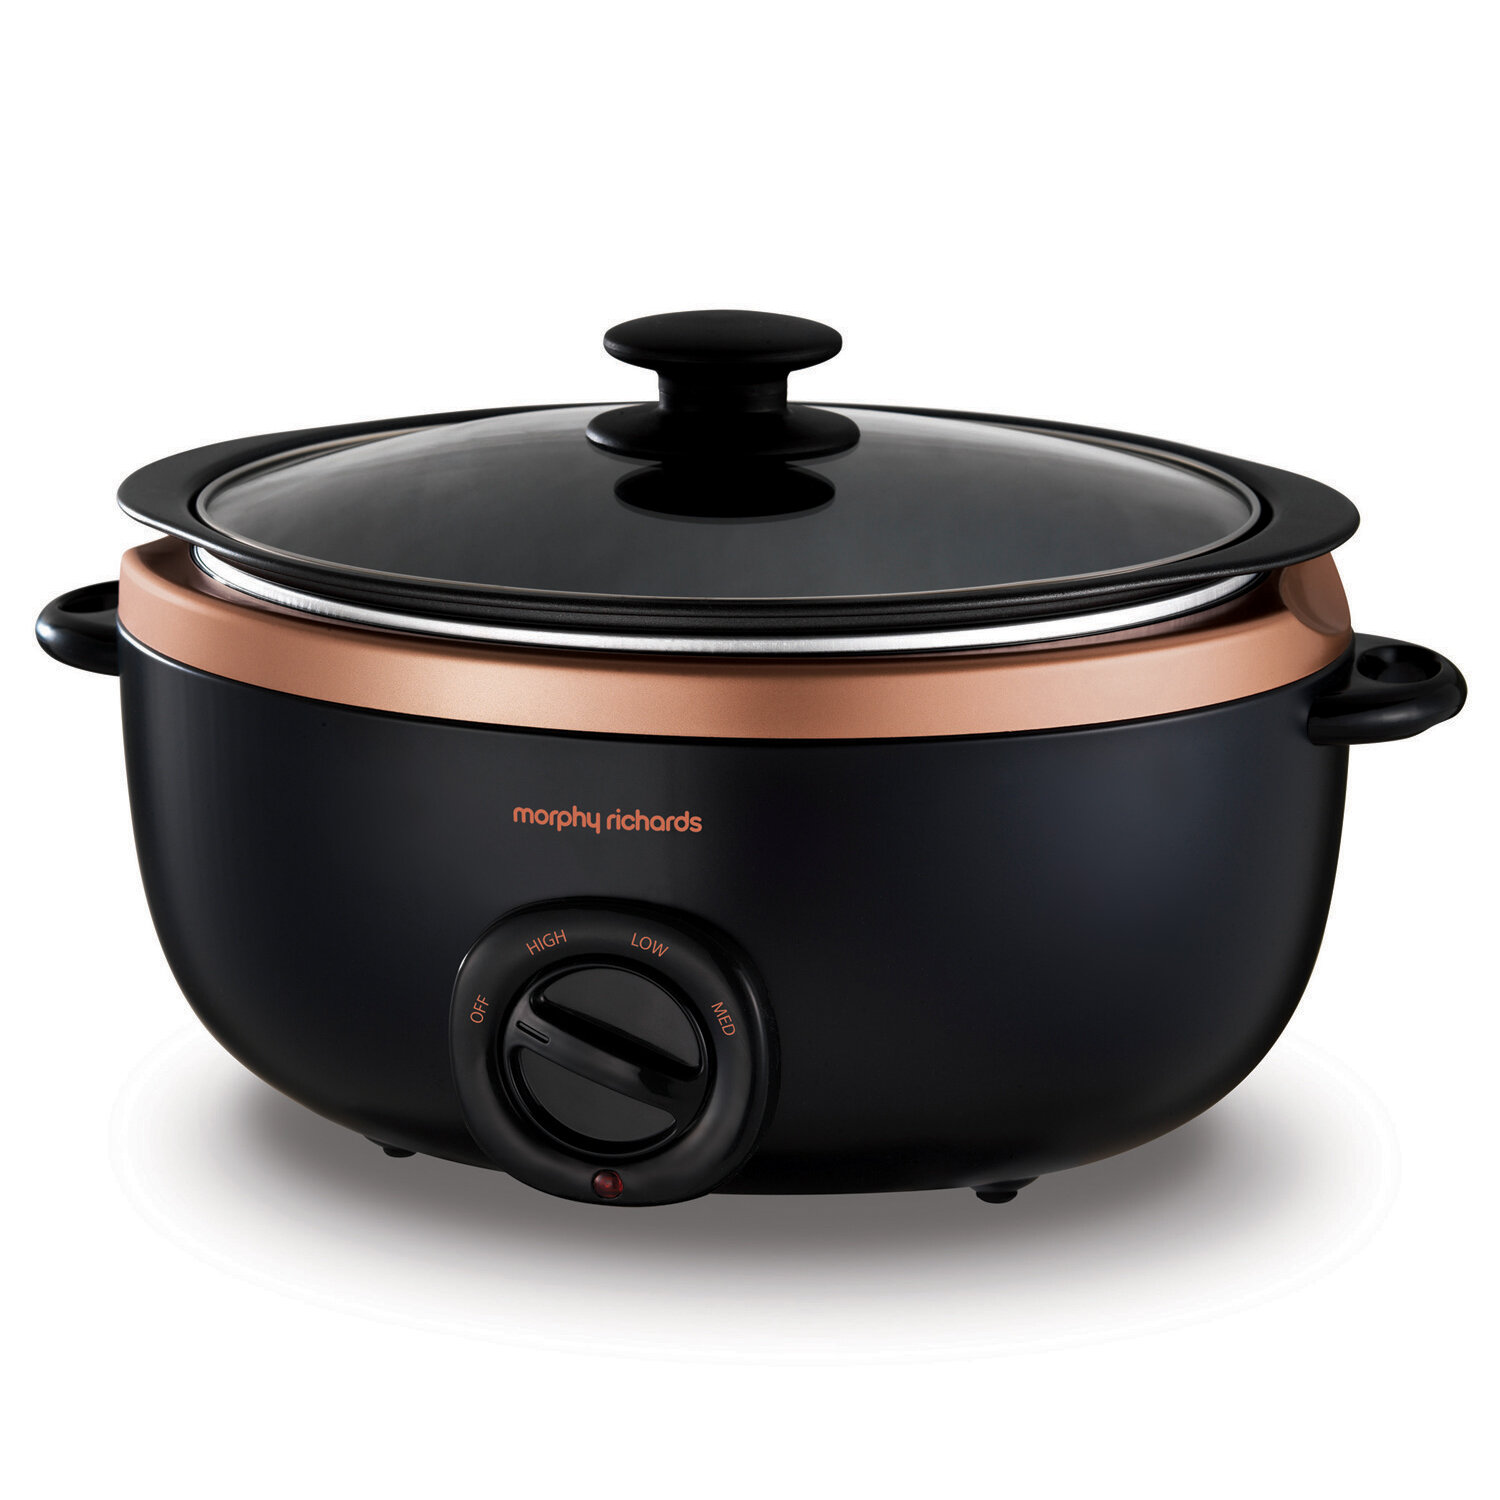 Morphy Richards Morphy Richards 461022 Oval Sear and Stew 6.5 Litre Slow Cooker Titanium 5011832070531 